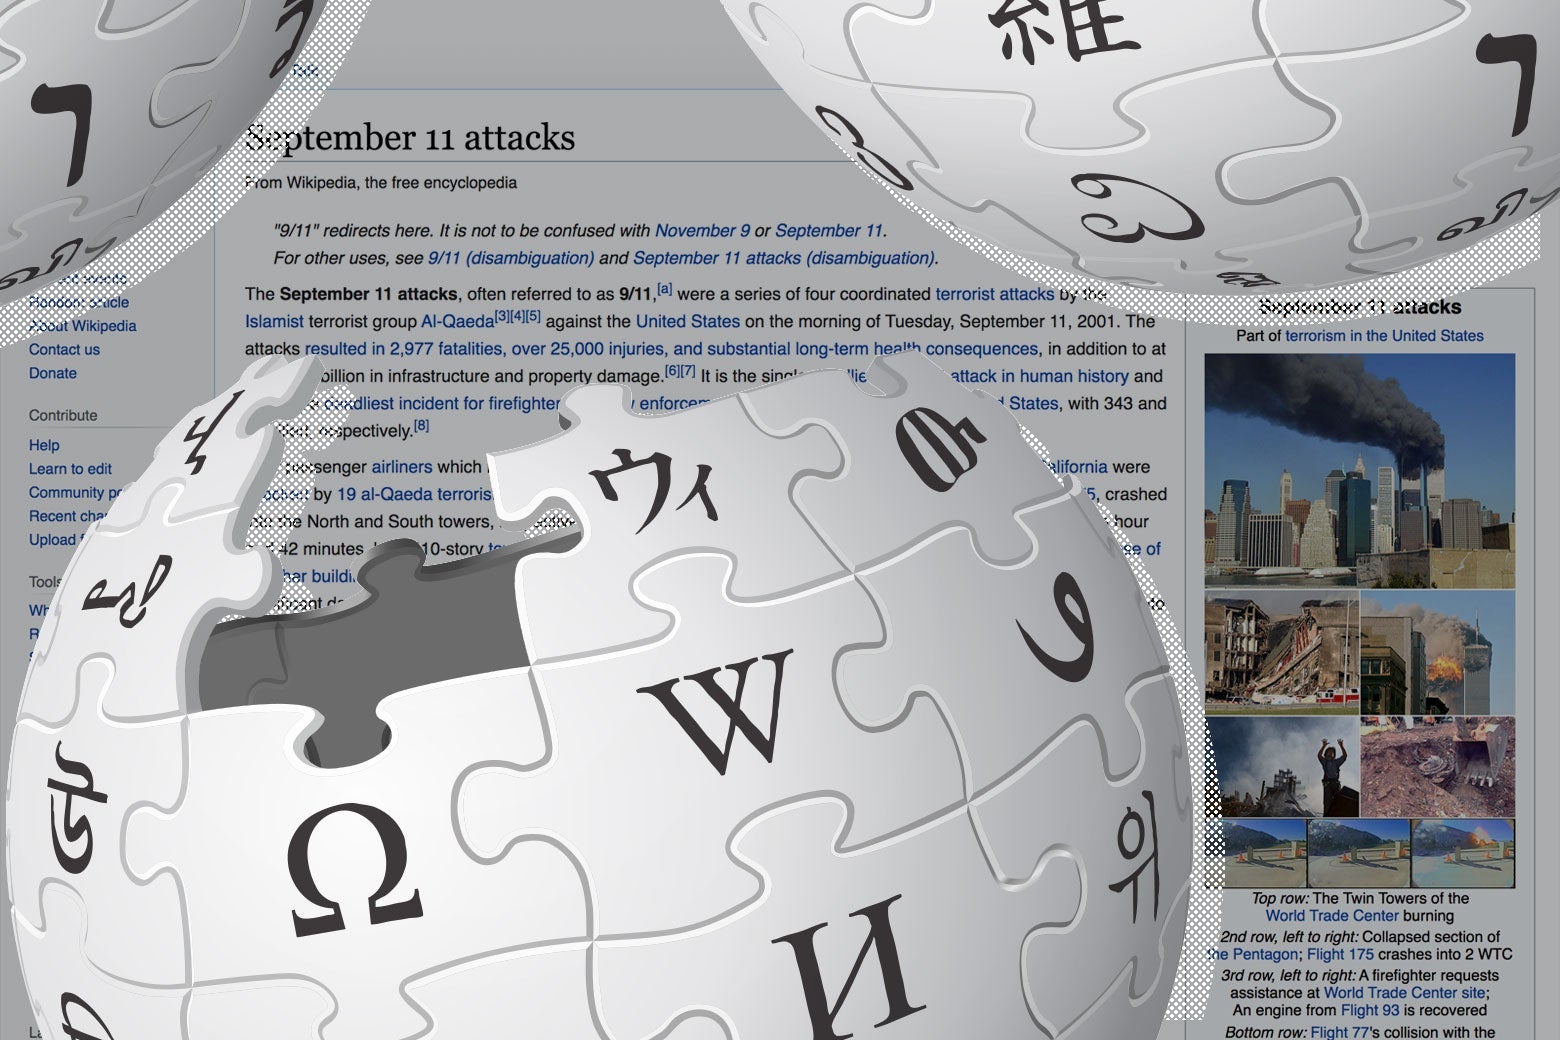 The Wikipedia logo repeated over the Wikipedia page for Sept. 11.